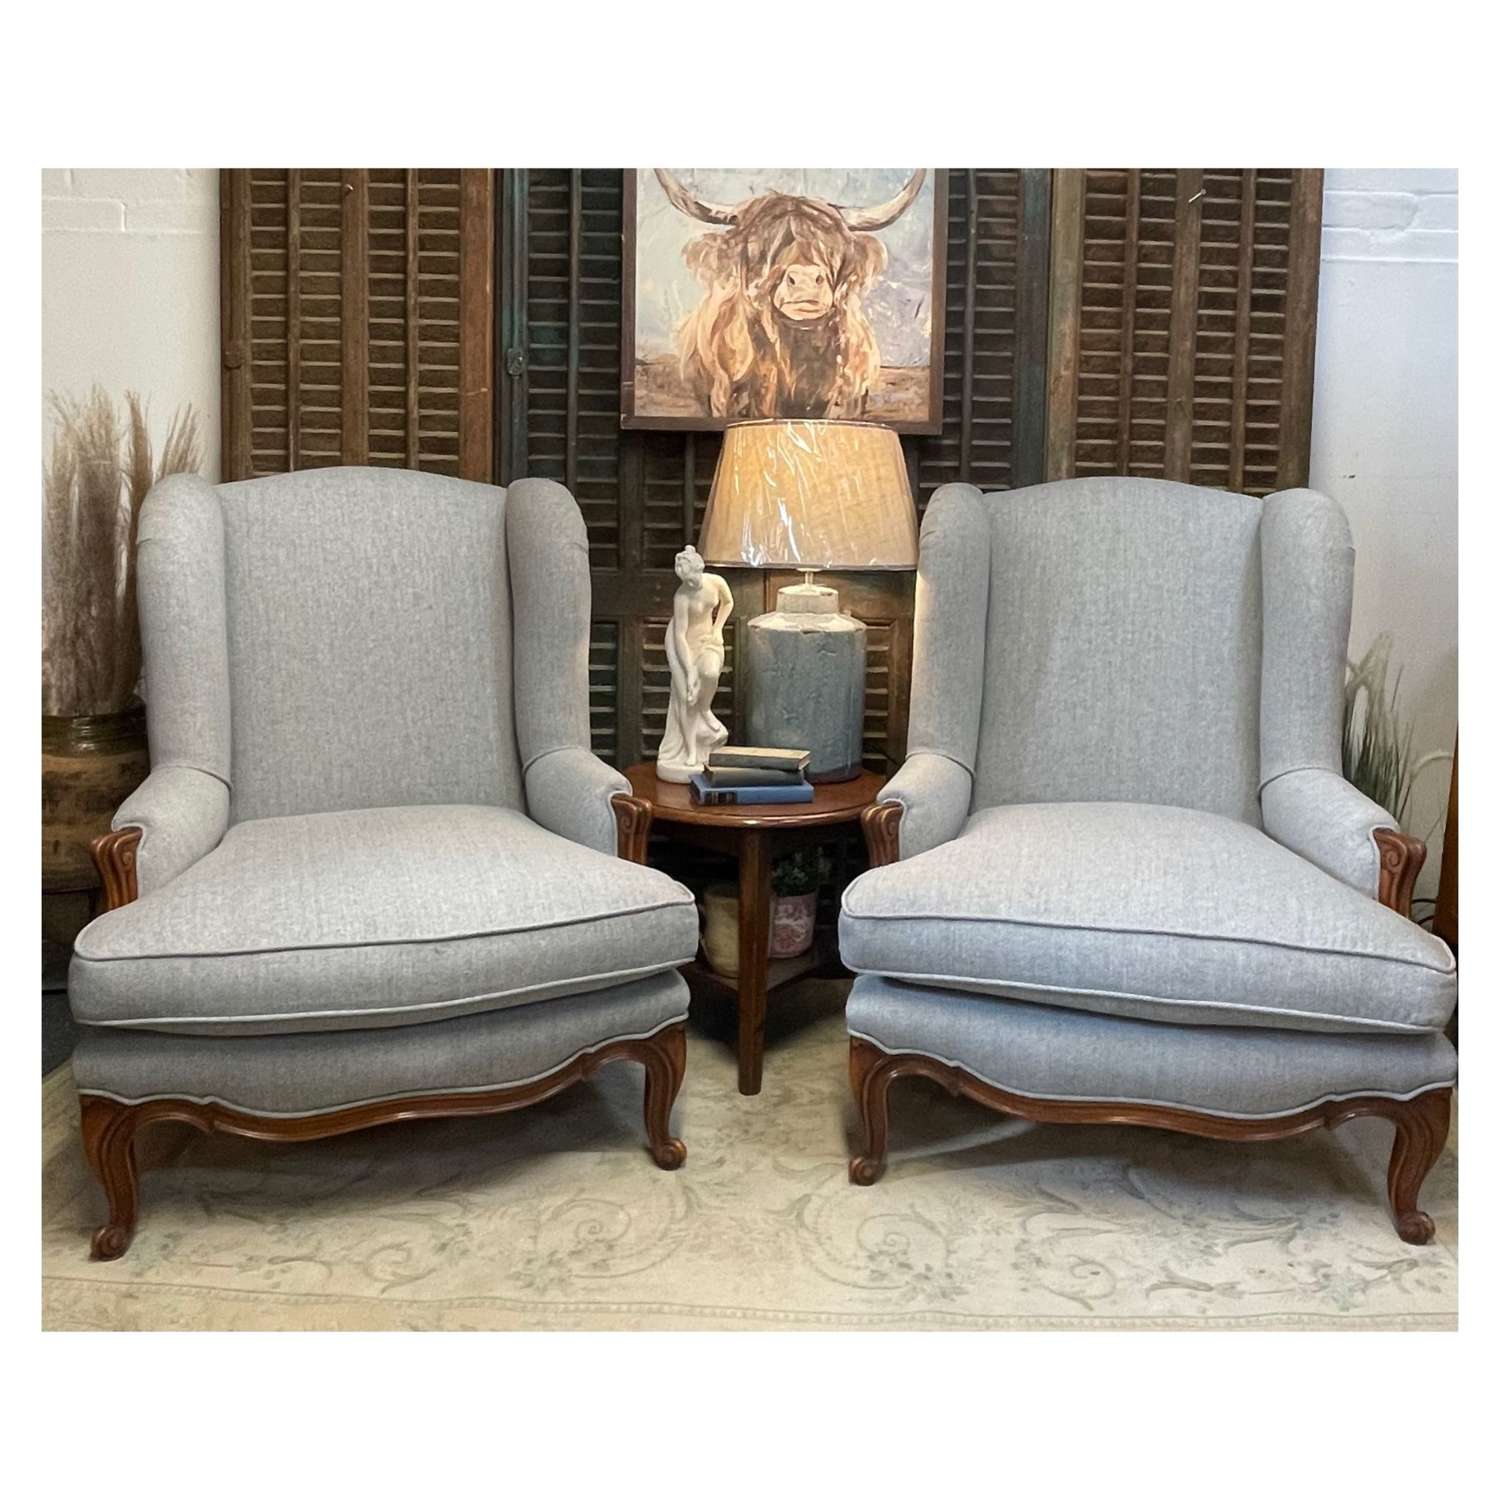 Pair Of Antique French Bergere Chairs - reupholstered